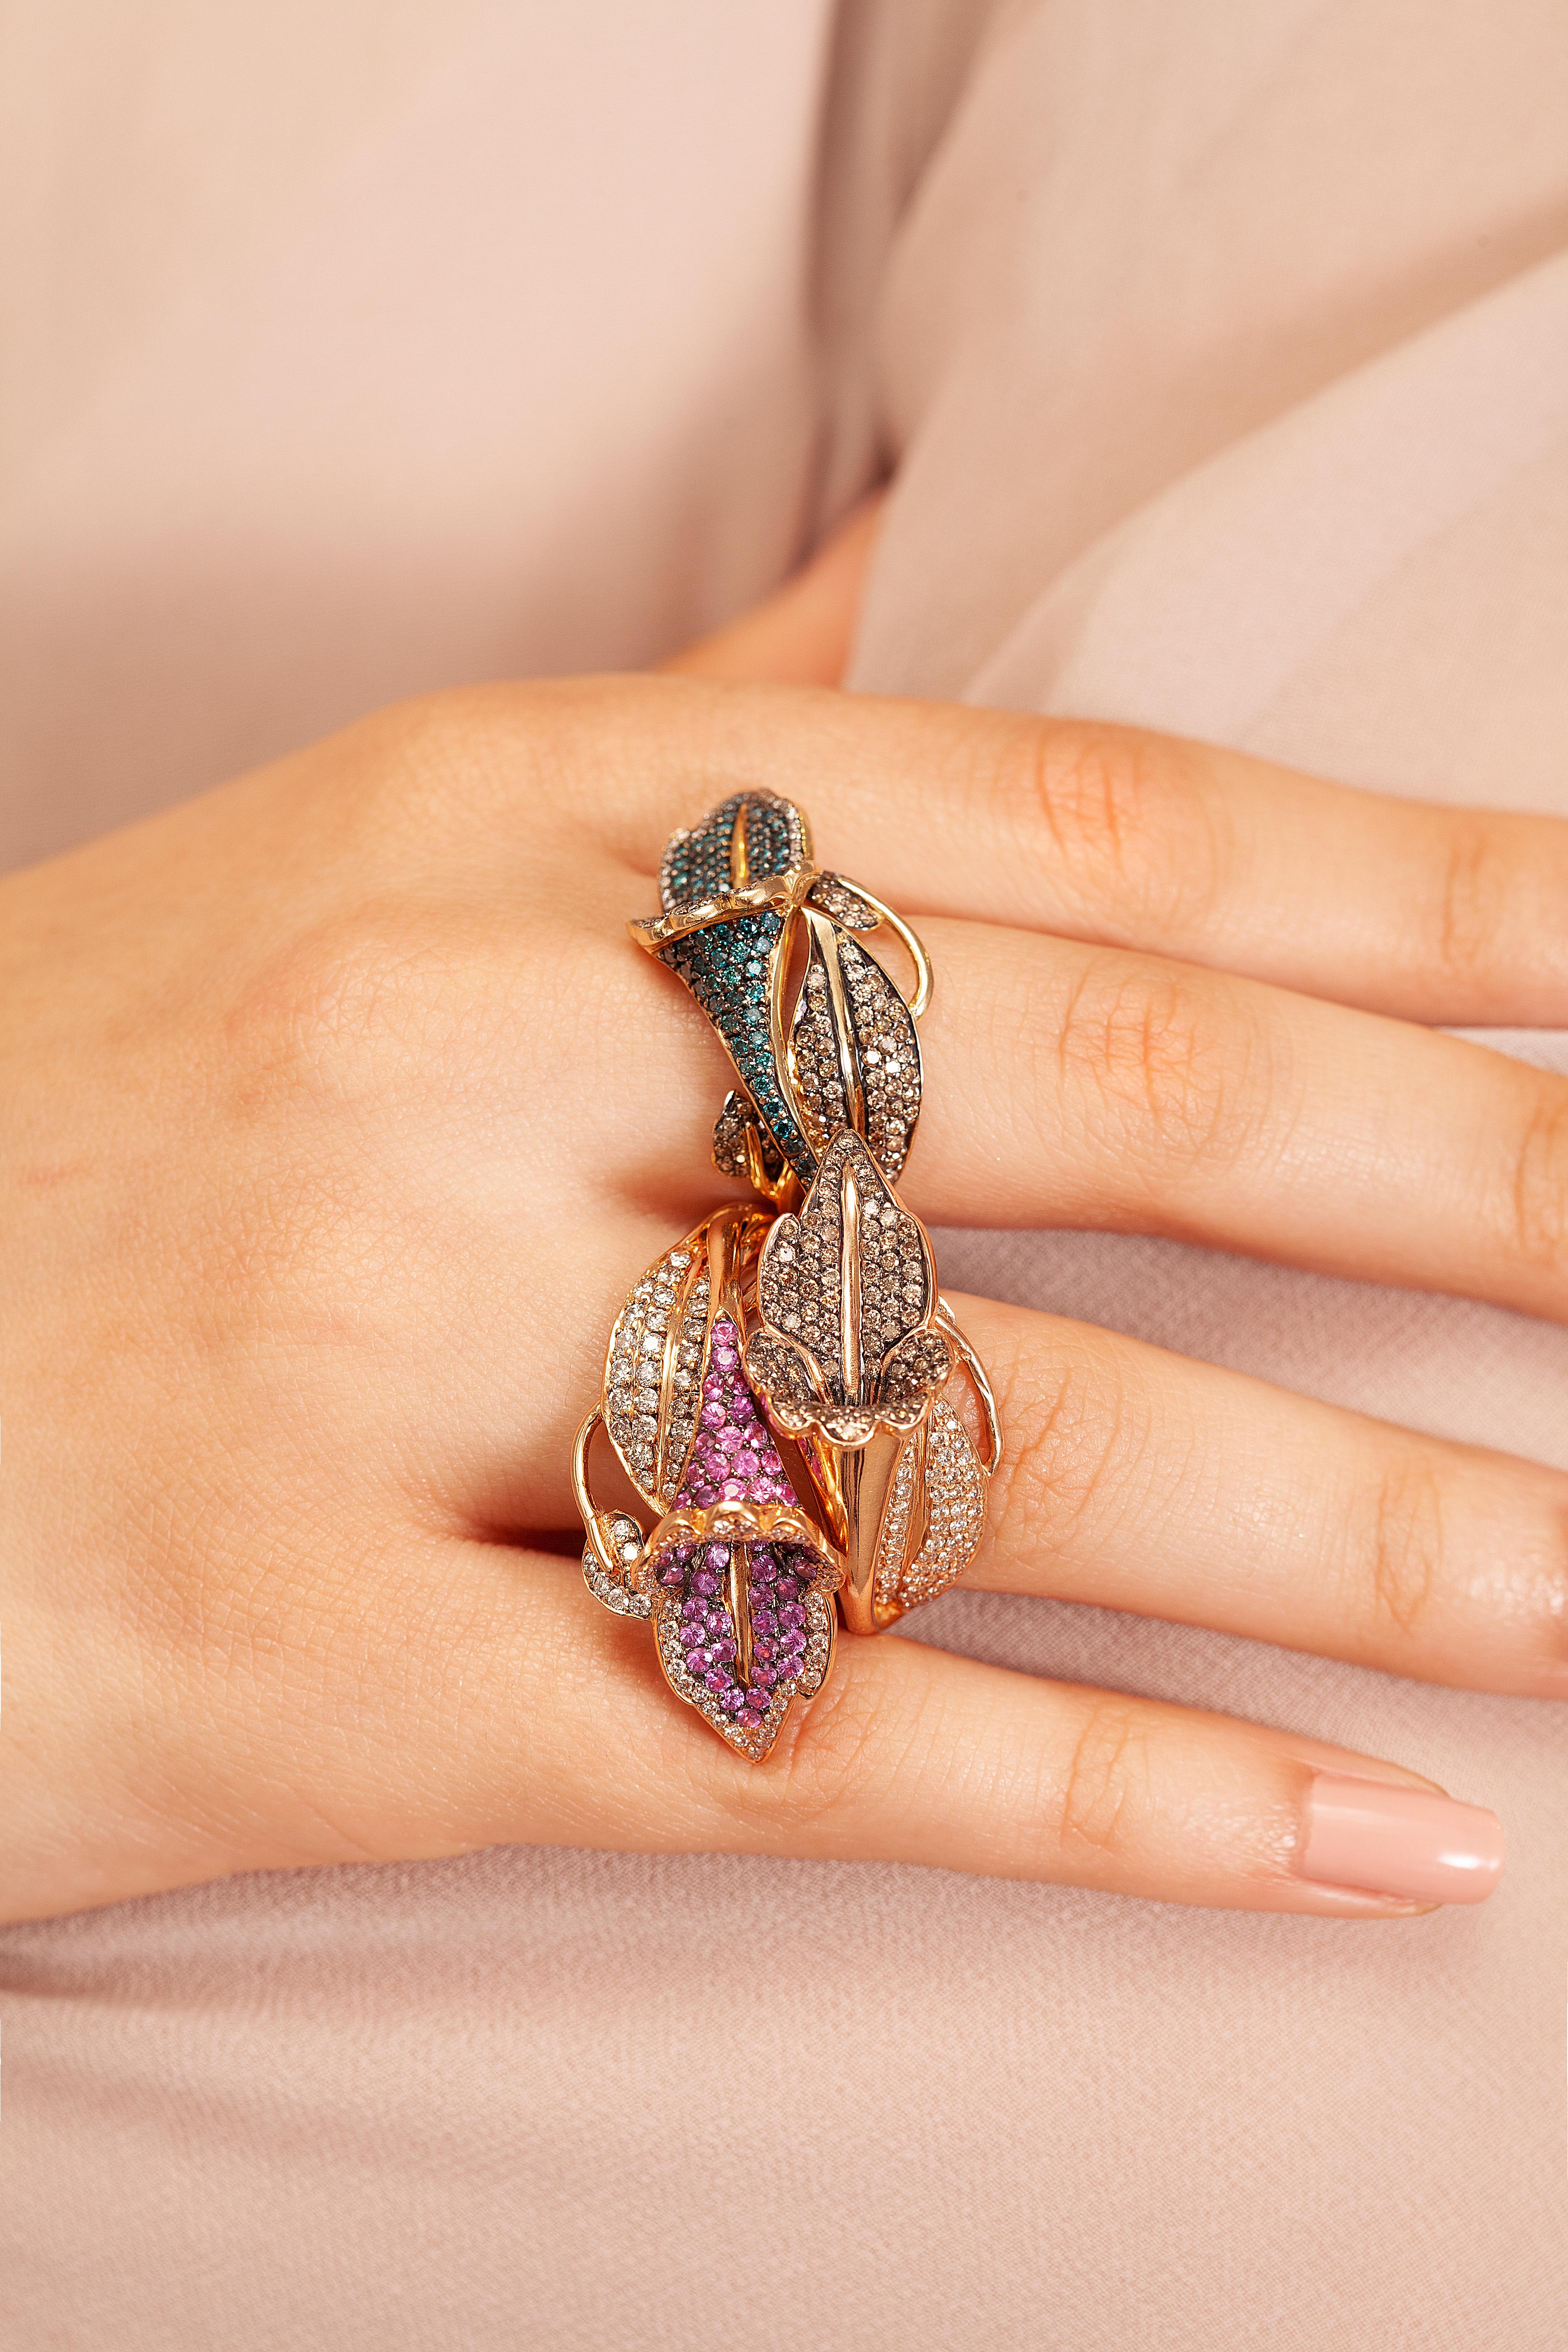 Belonging to the Aida Bergsen Stacking Series, the Pink Campanula Ring is a subtle yet powerful statement piece. This piece is set in 18k rose gold with 0,67ct diamonds and 1,30ct pink sapphires.

A humble yet astonishing flower that brightens up